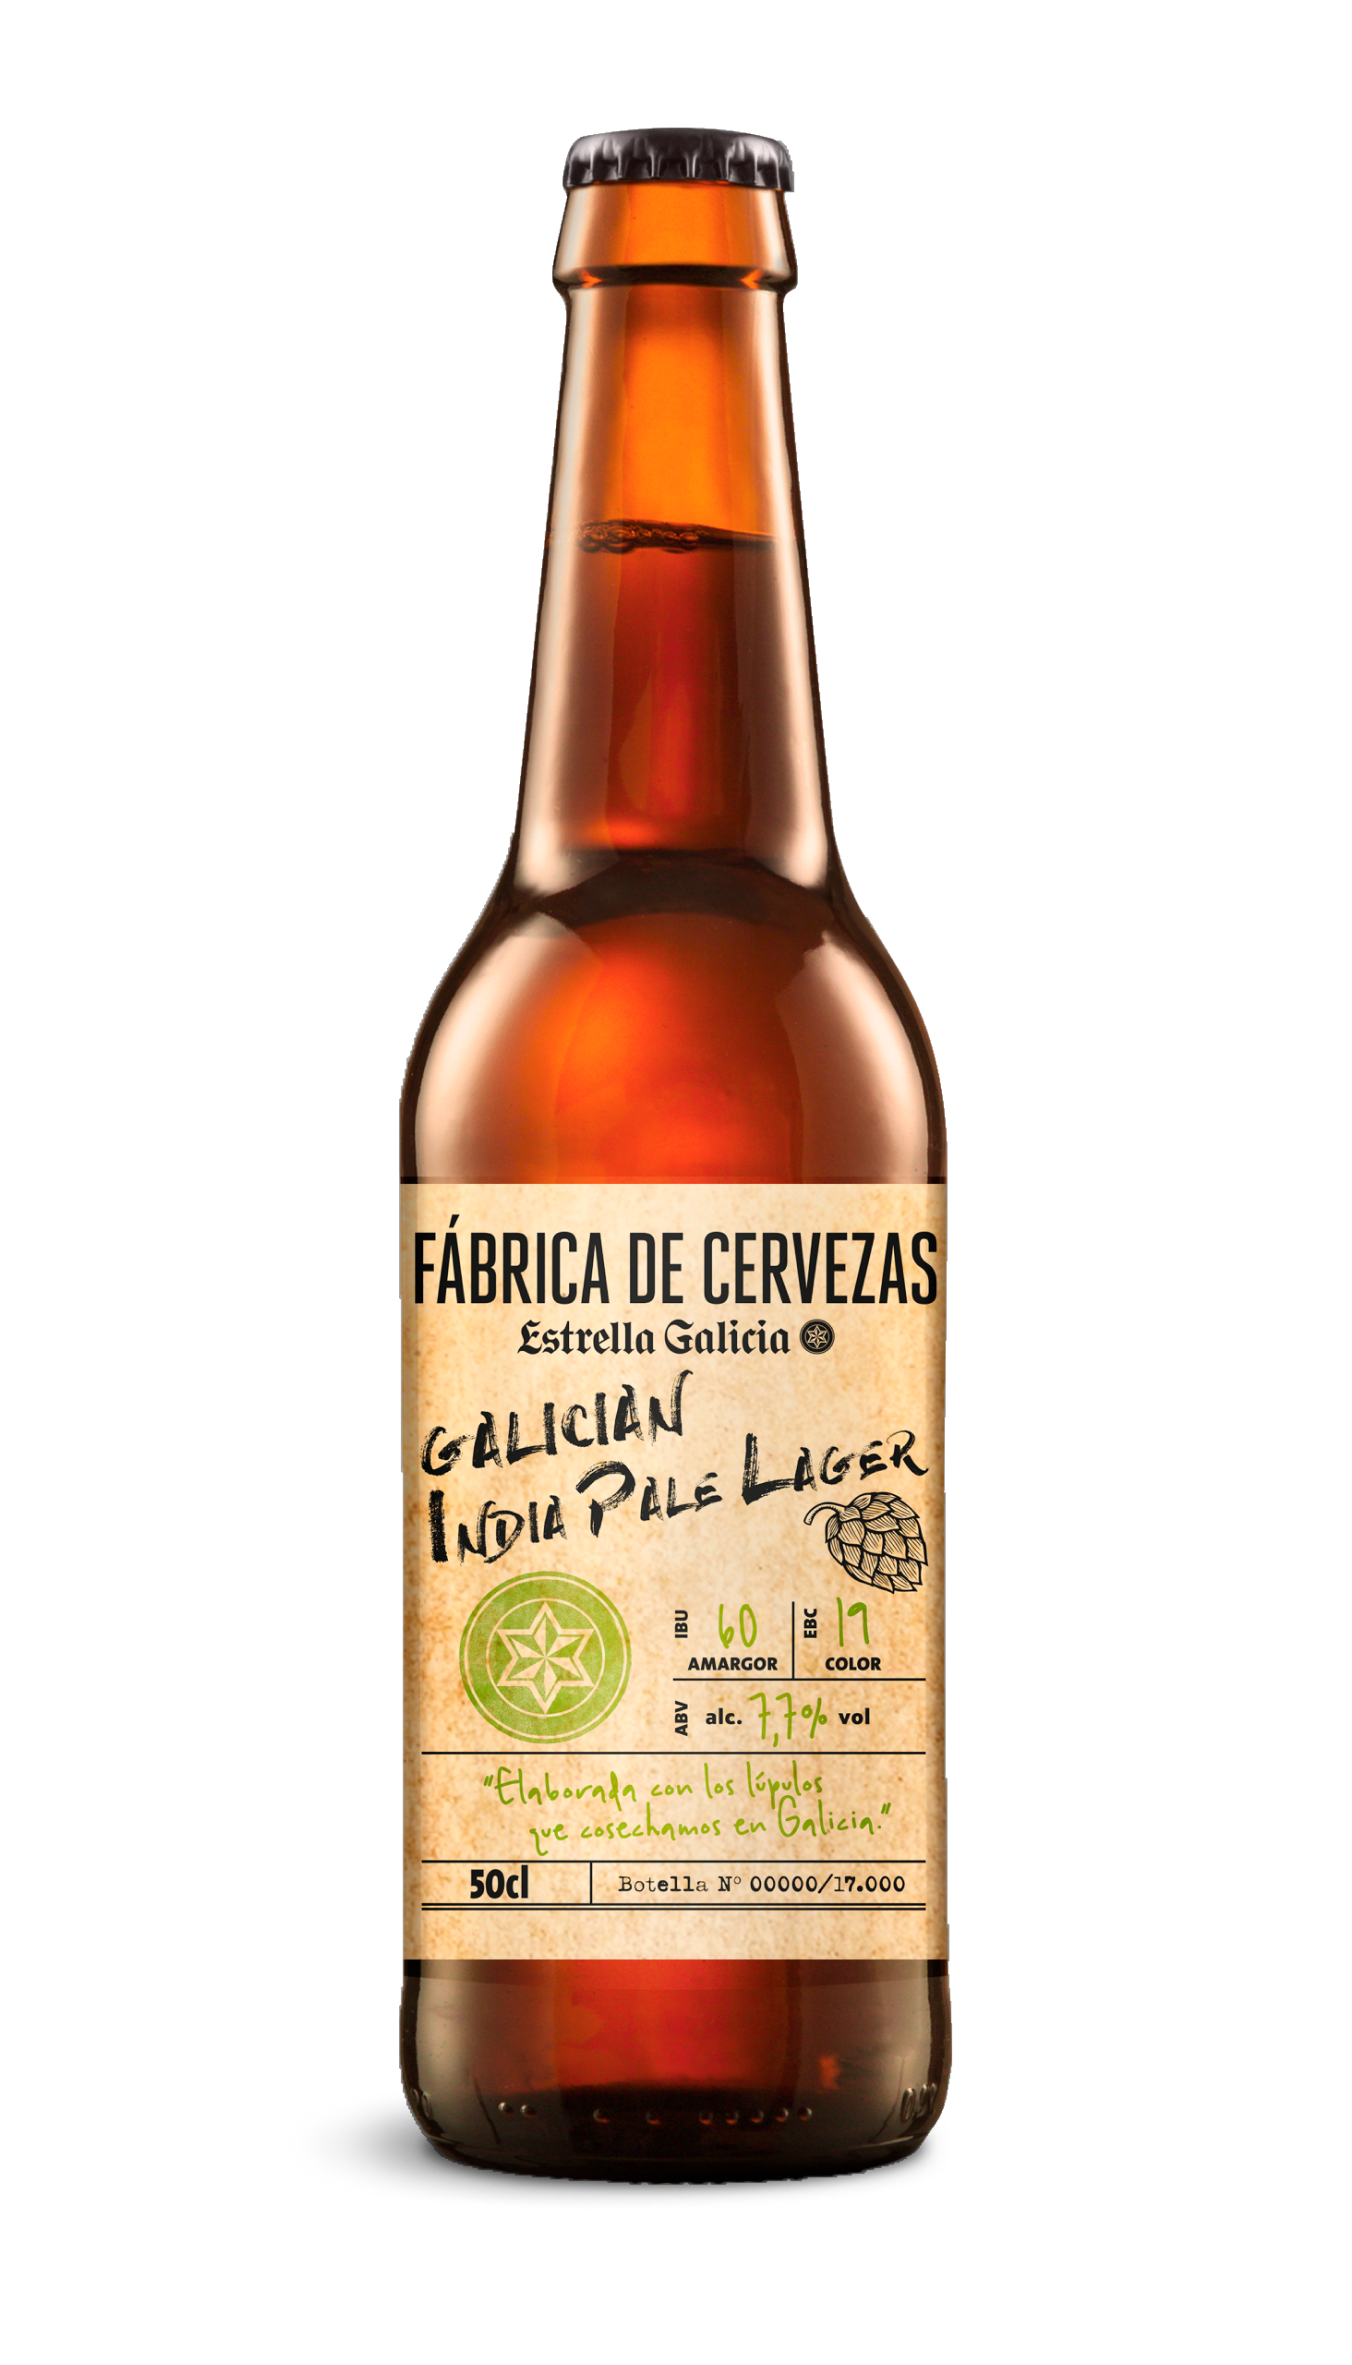 Galician India Pale Lager